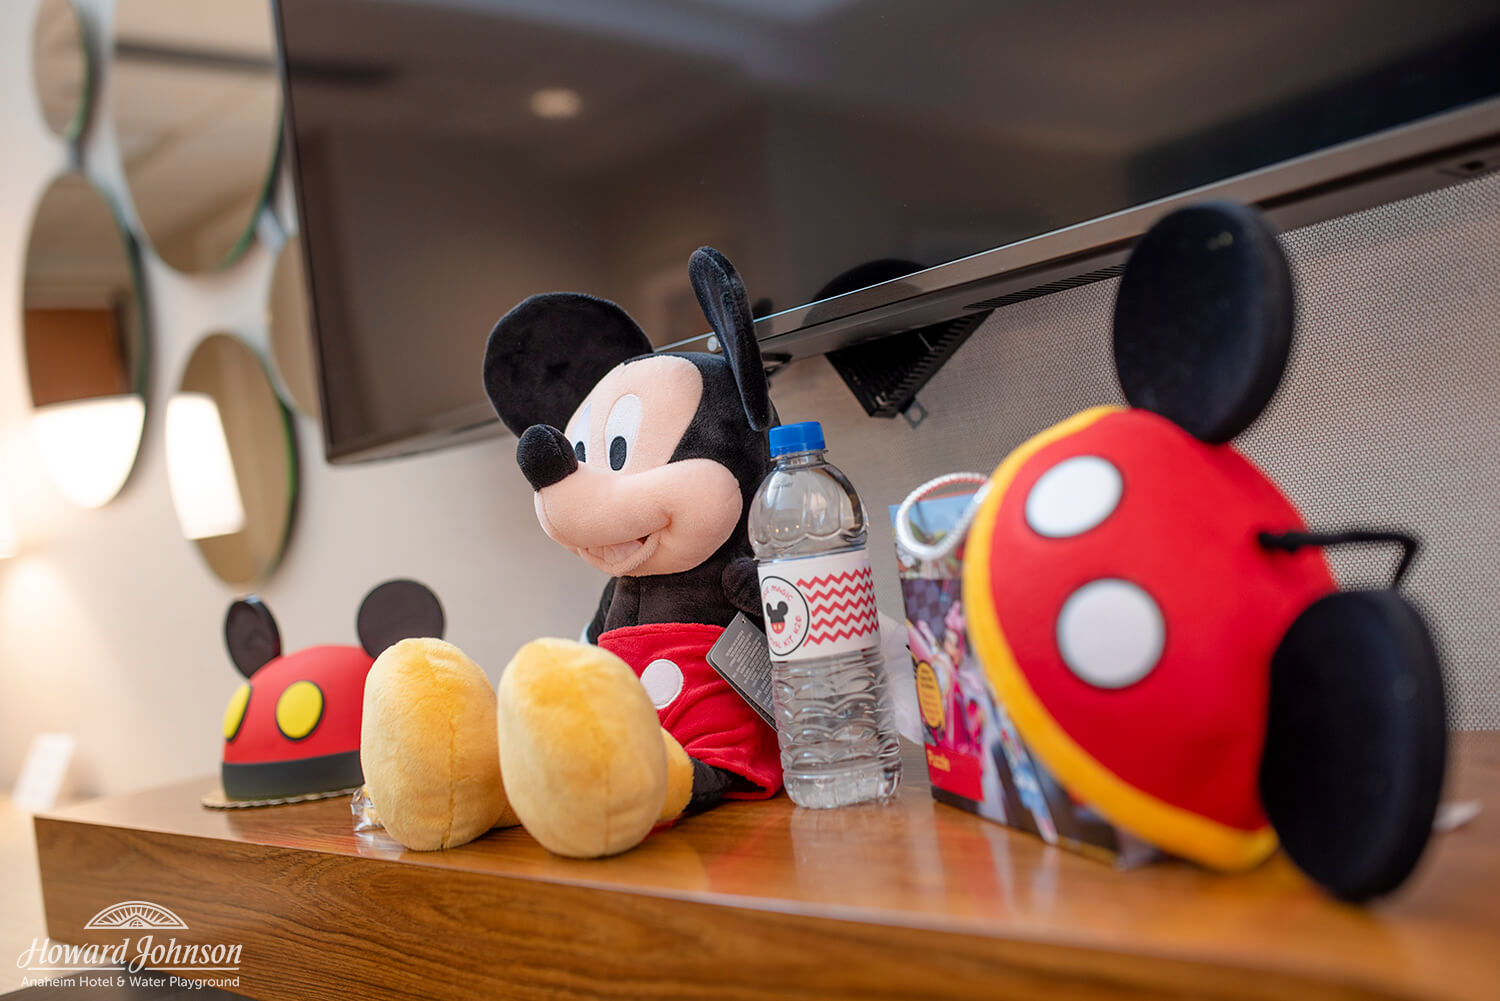 Mickey Mouse themed accessories, items, and a cake sit on a table in a hotel room